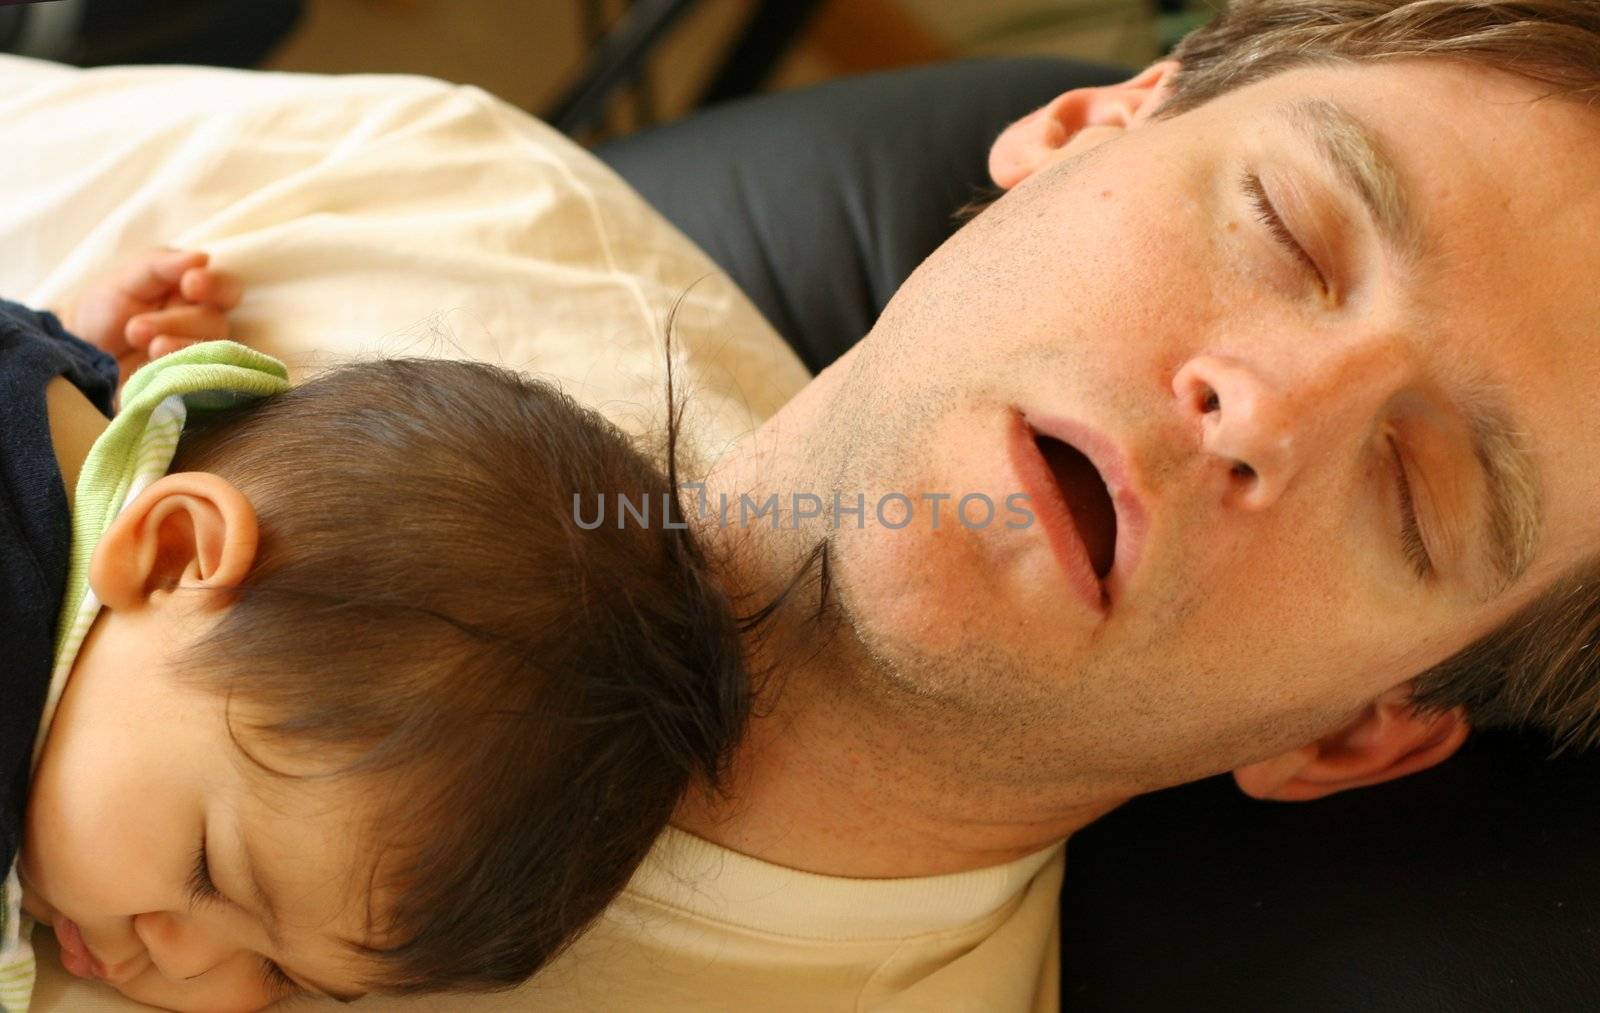 Baby asleep on his father's chest.